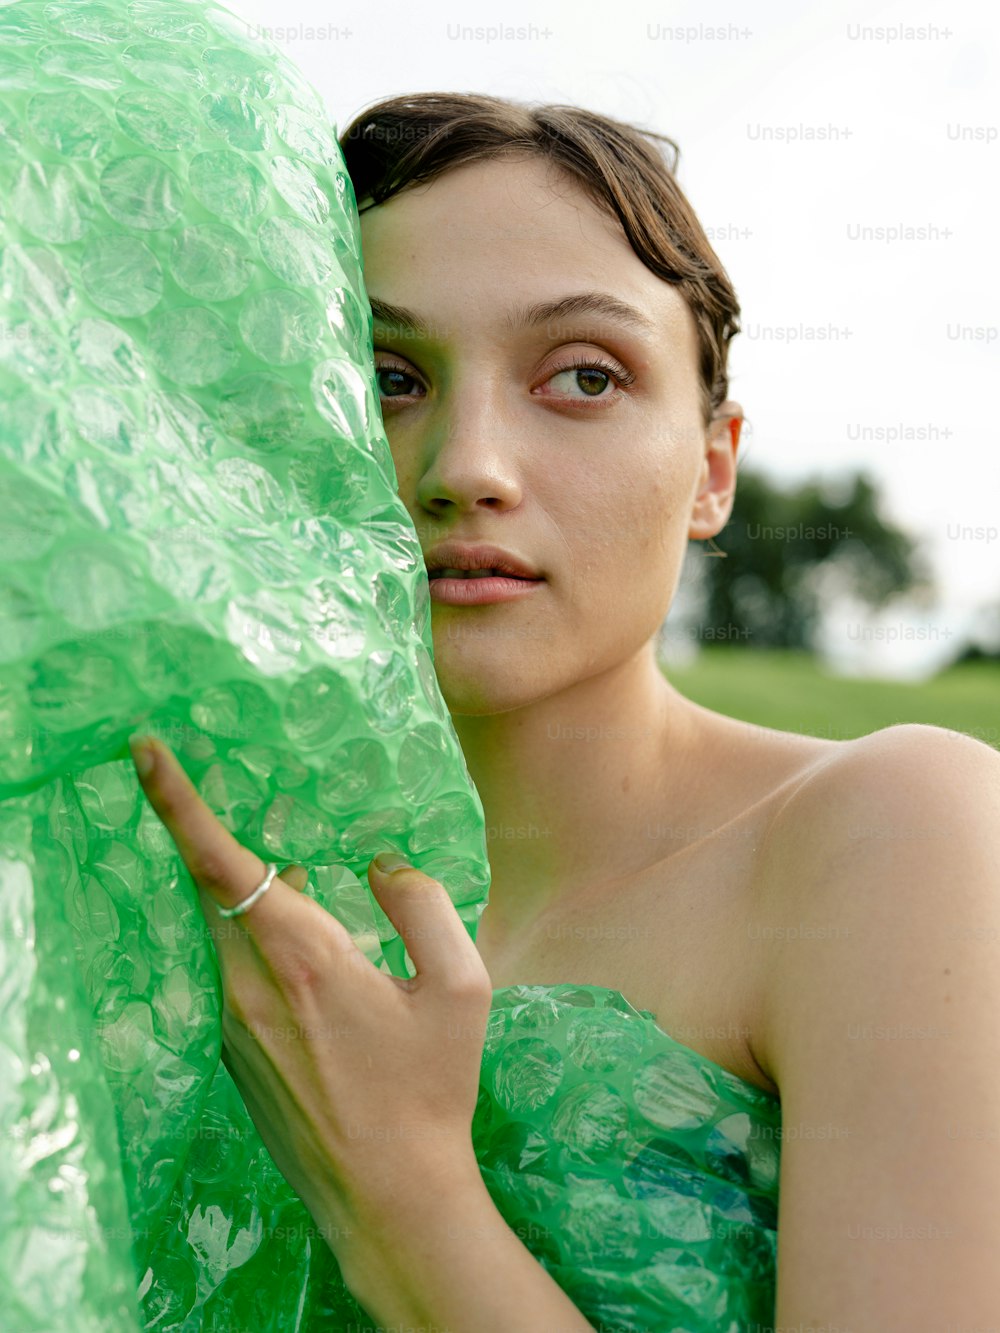 a woman in a green dress holding a plastic bag